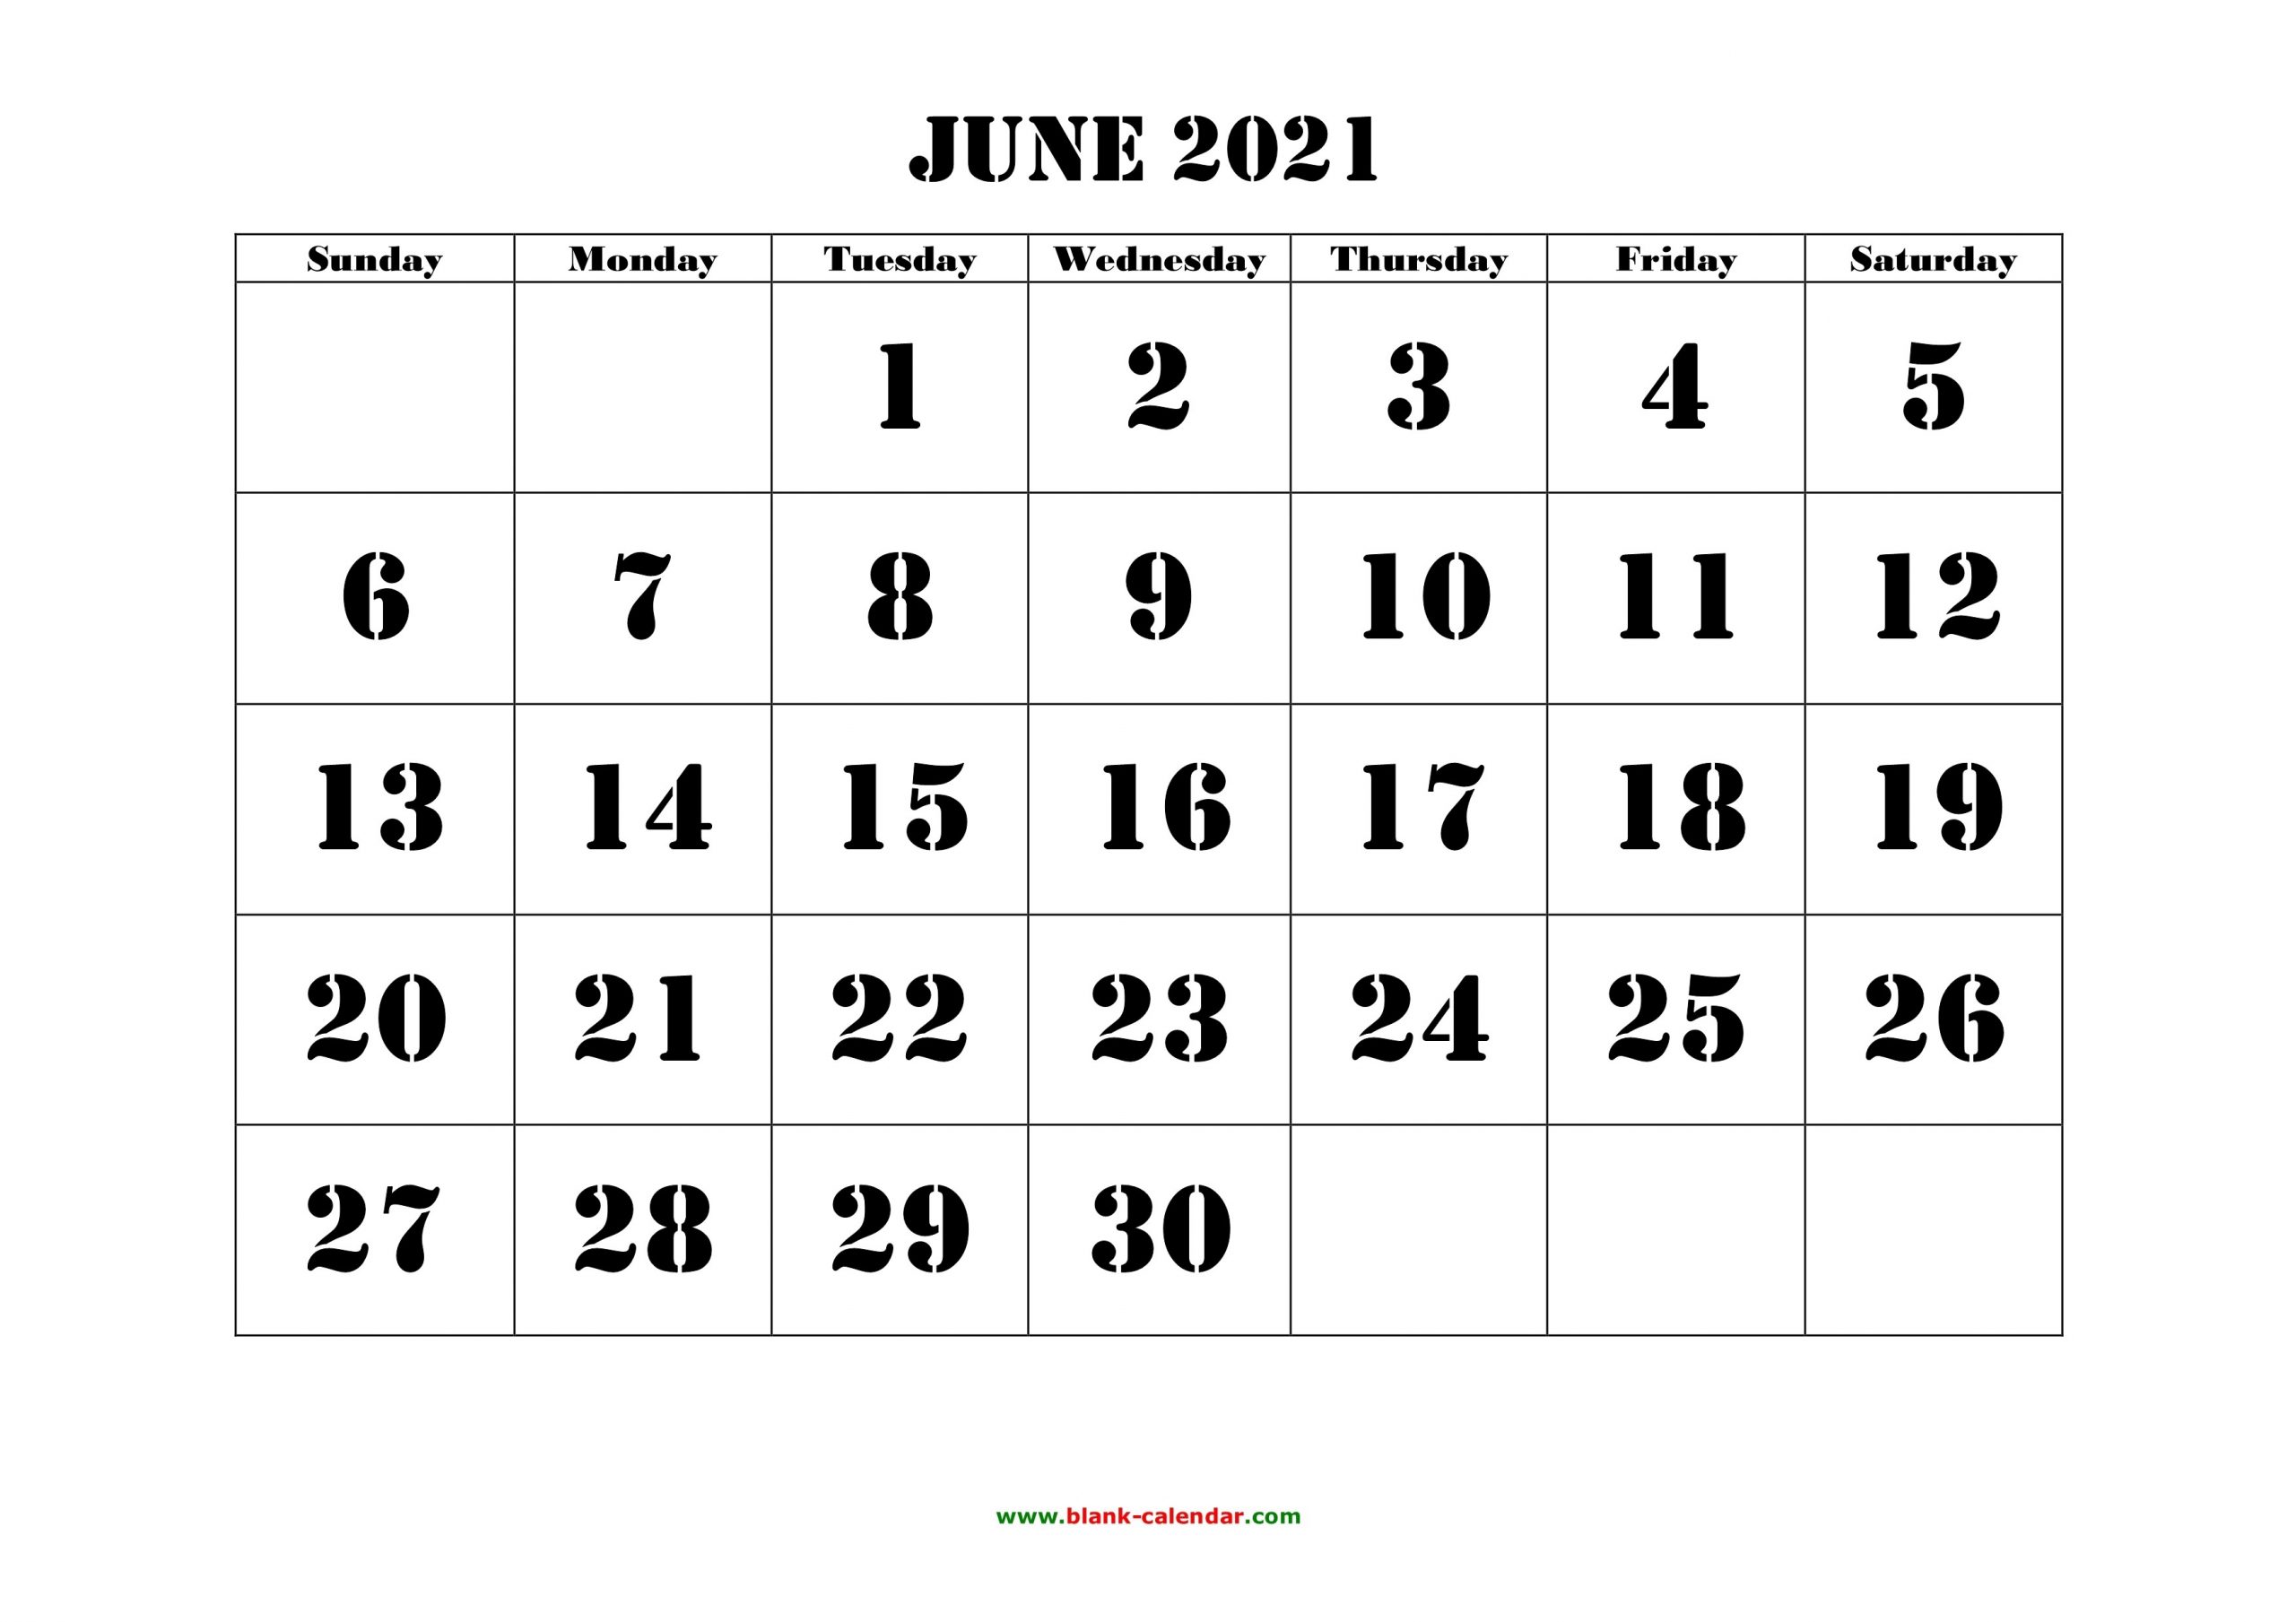 June 2021 Printable Calendar | Free Download Monthly-Blank Monthly Calendar 2021 June 2021 With Grid